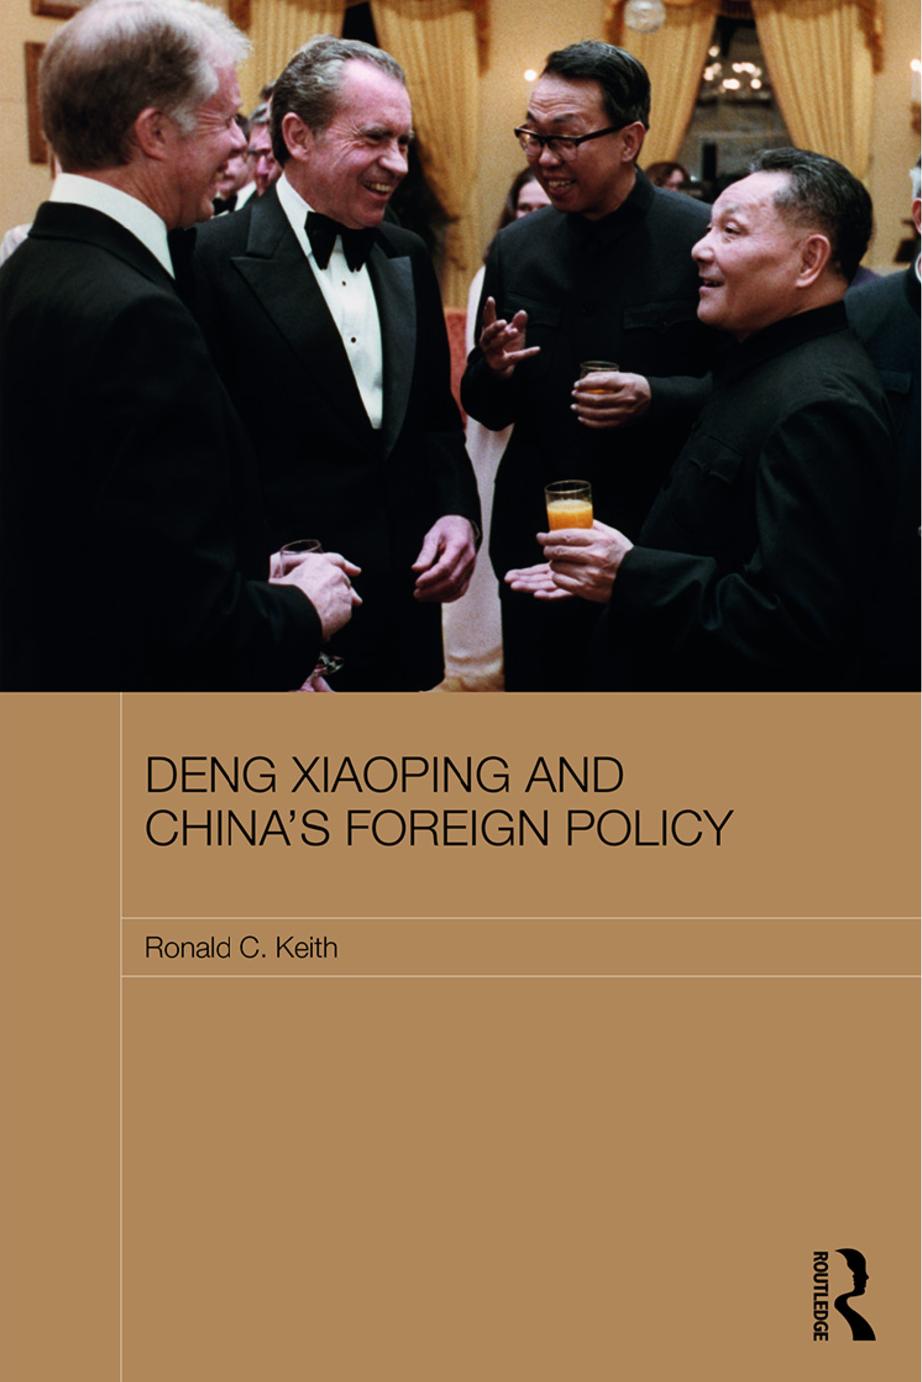 Deng Xiaoping and China's Foreign Policy by Ronald C. Keith